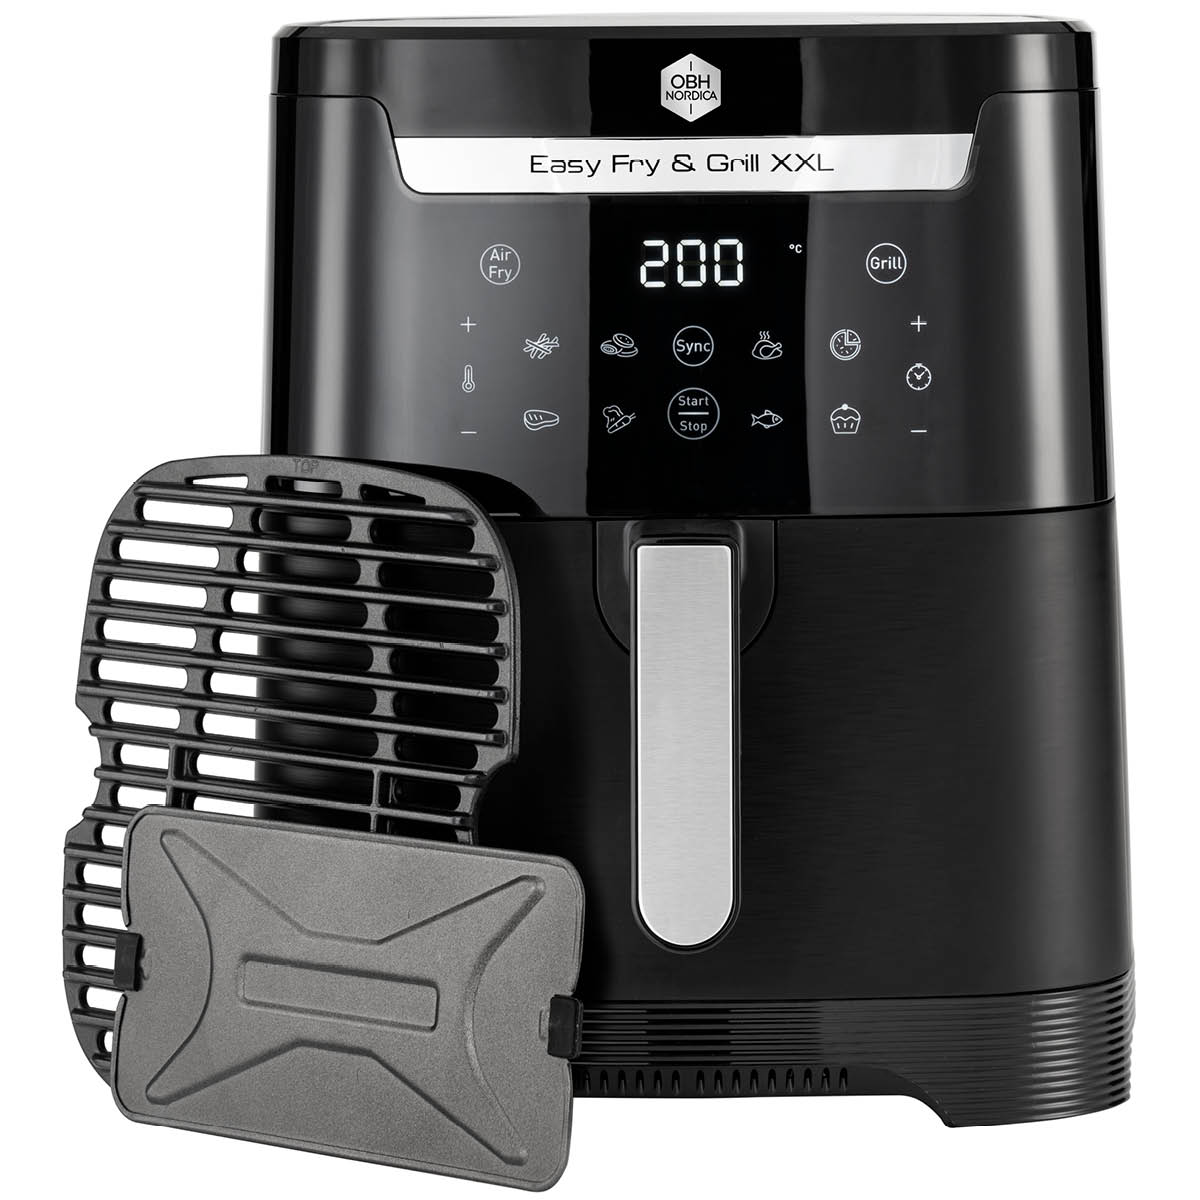 OBH Nordica - Easy Fry & Grill XXL 2-i-1 airfryer AG8018S0 Svart